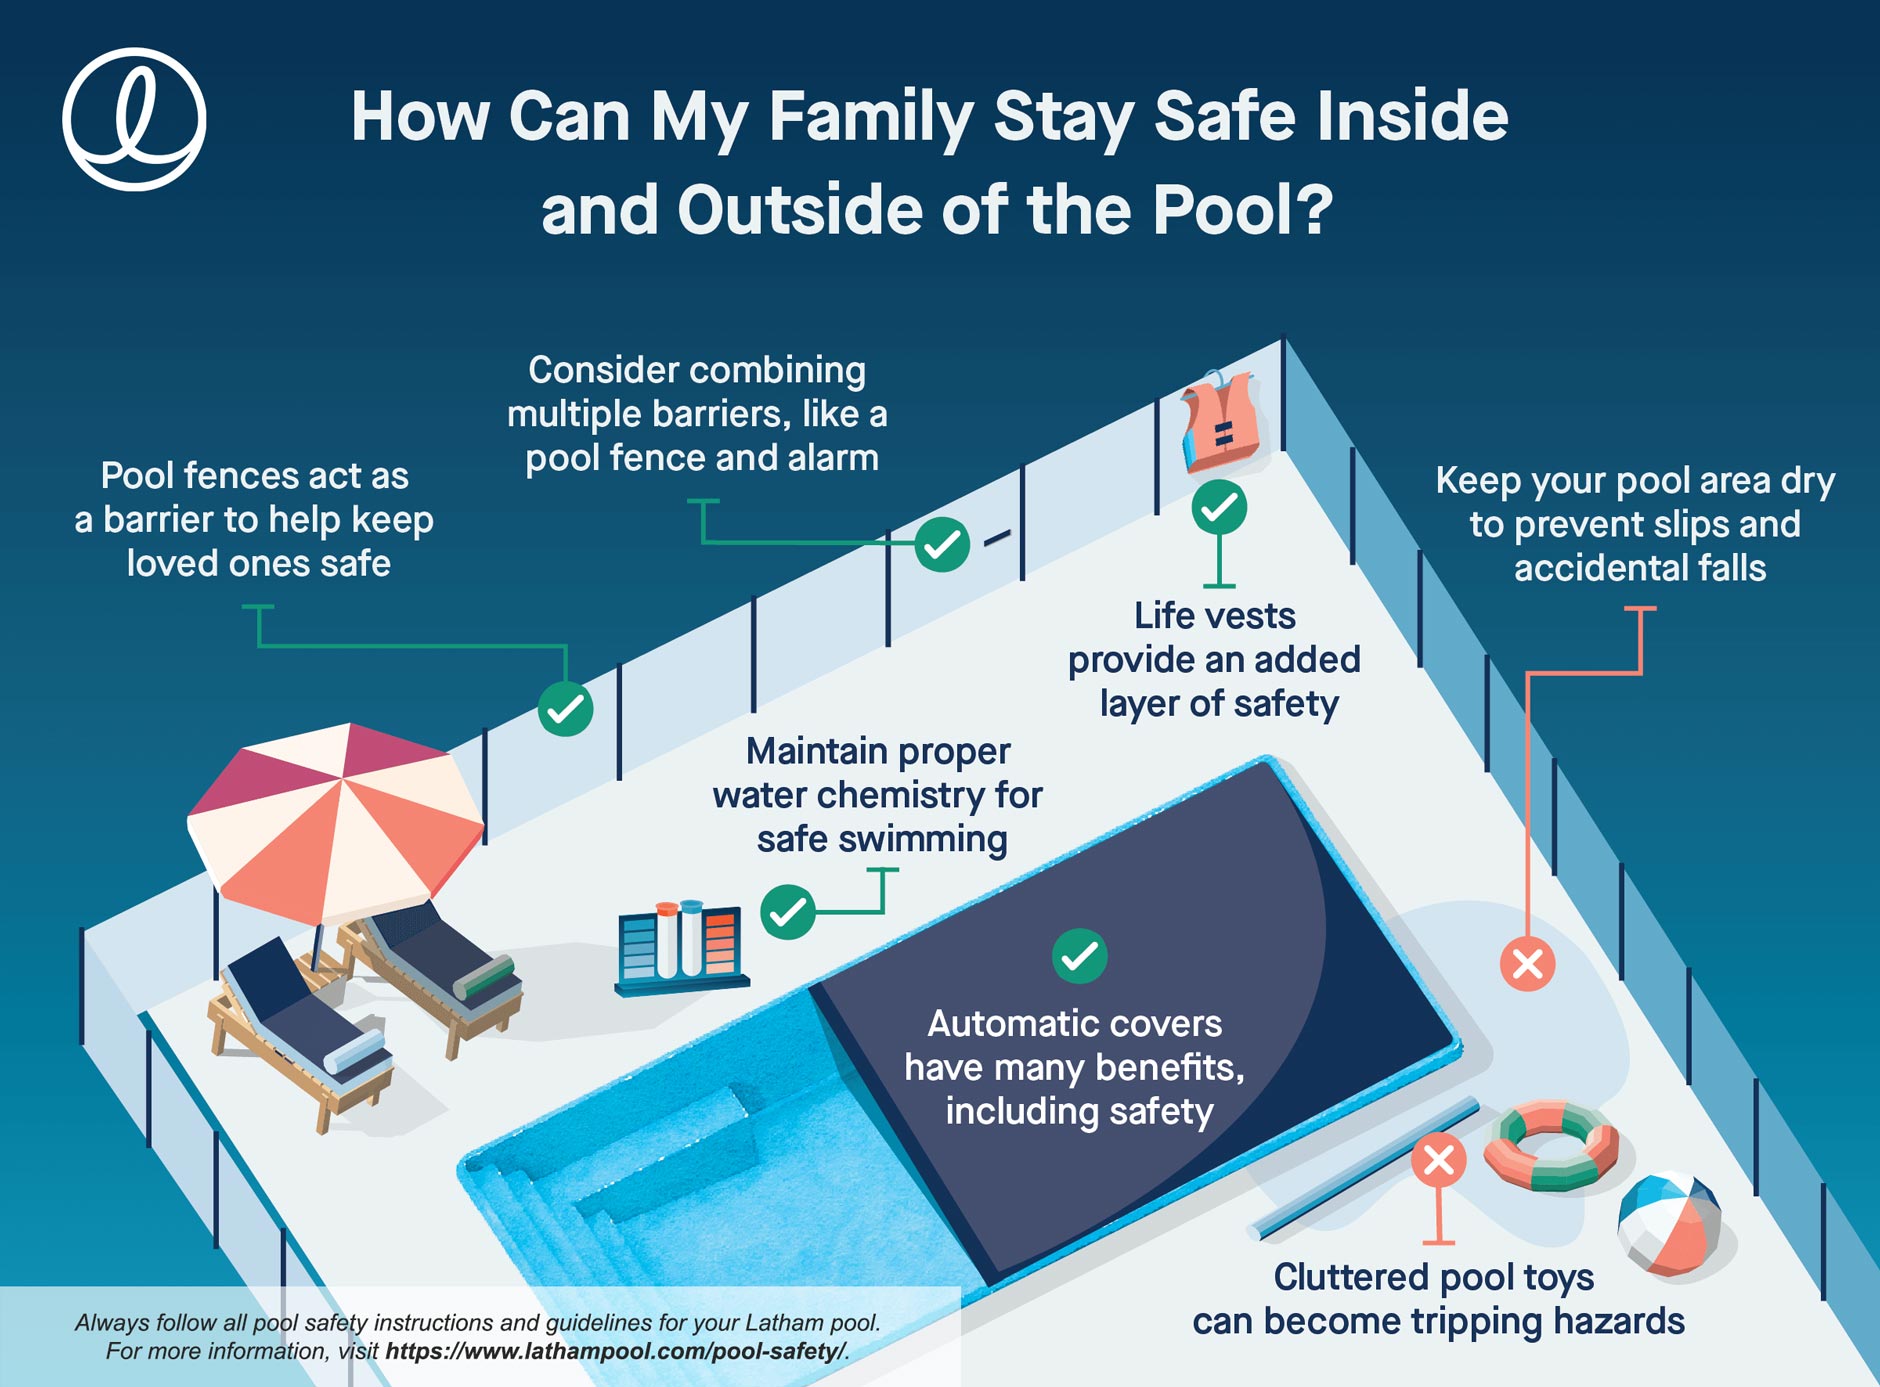 Swimming pool database shows how safe, clean your local pool is